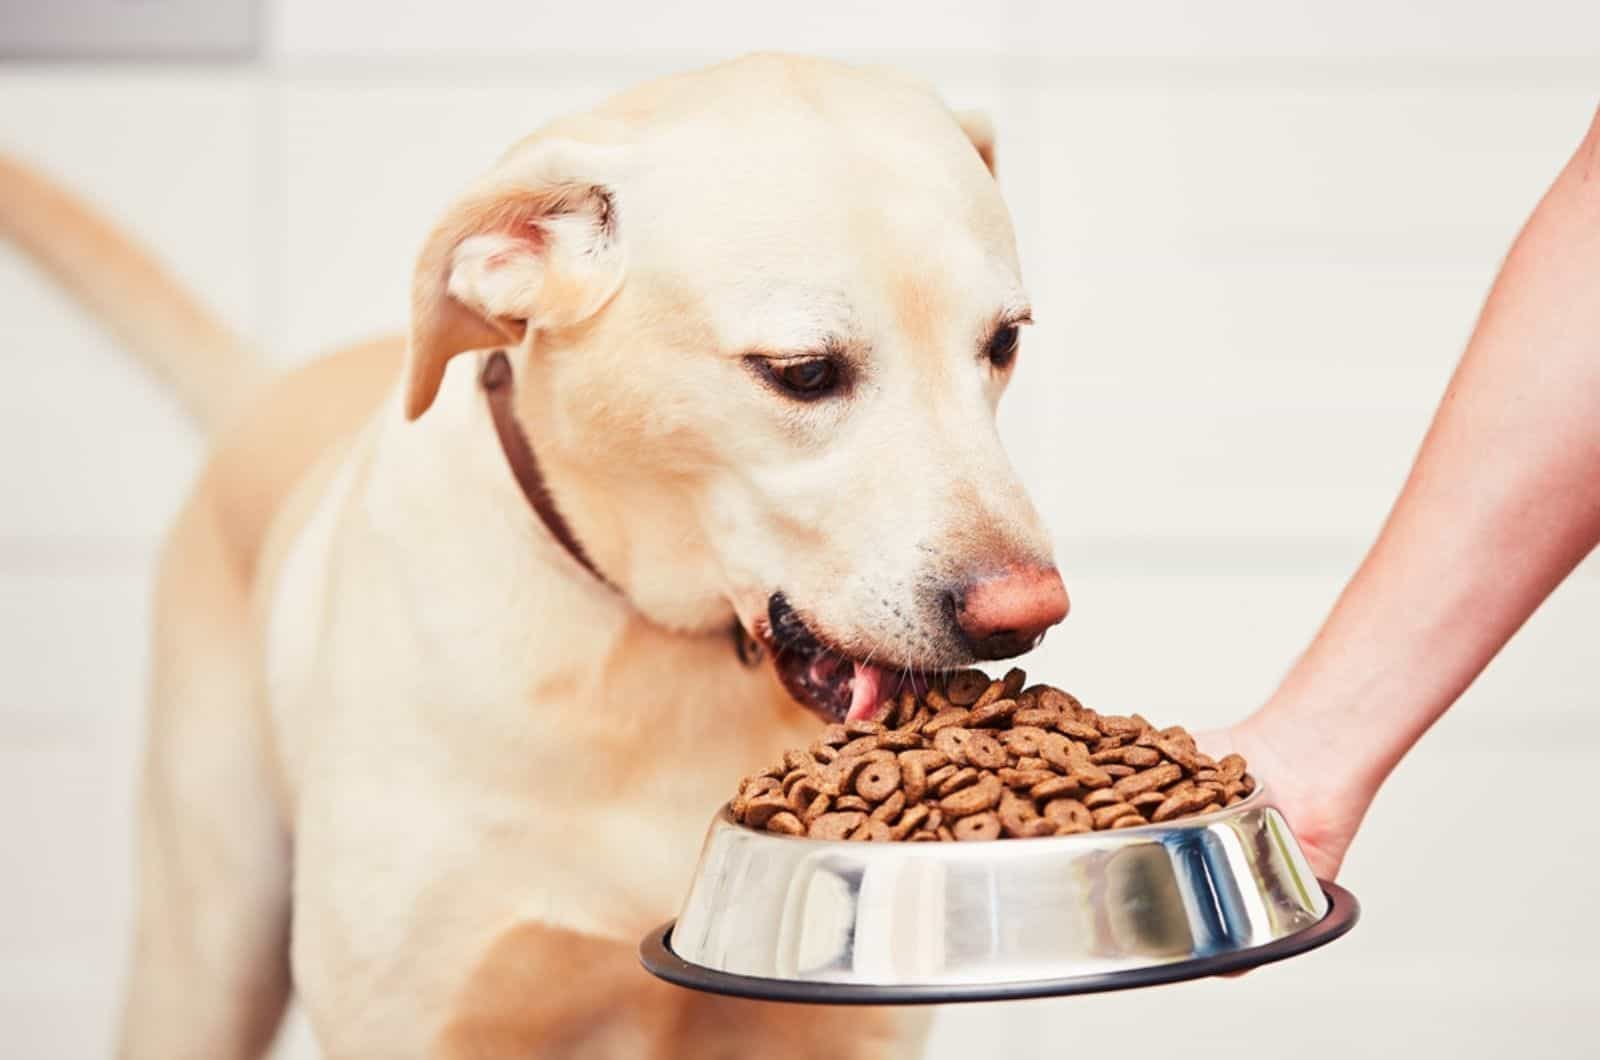 Decoding Clingy Behavior: Why Does My Dog Eat Only When I’m Around?